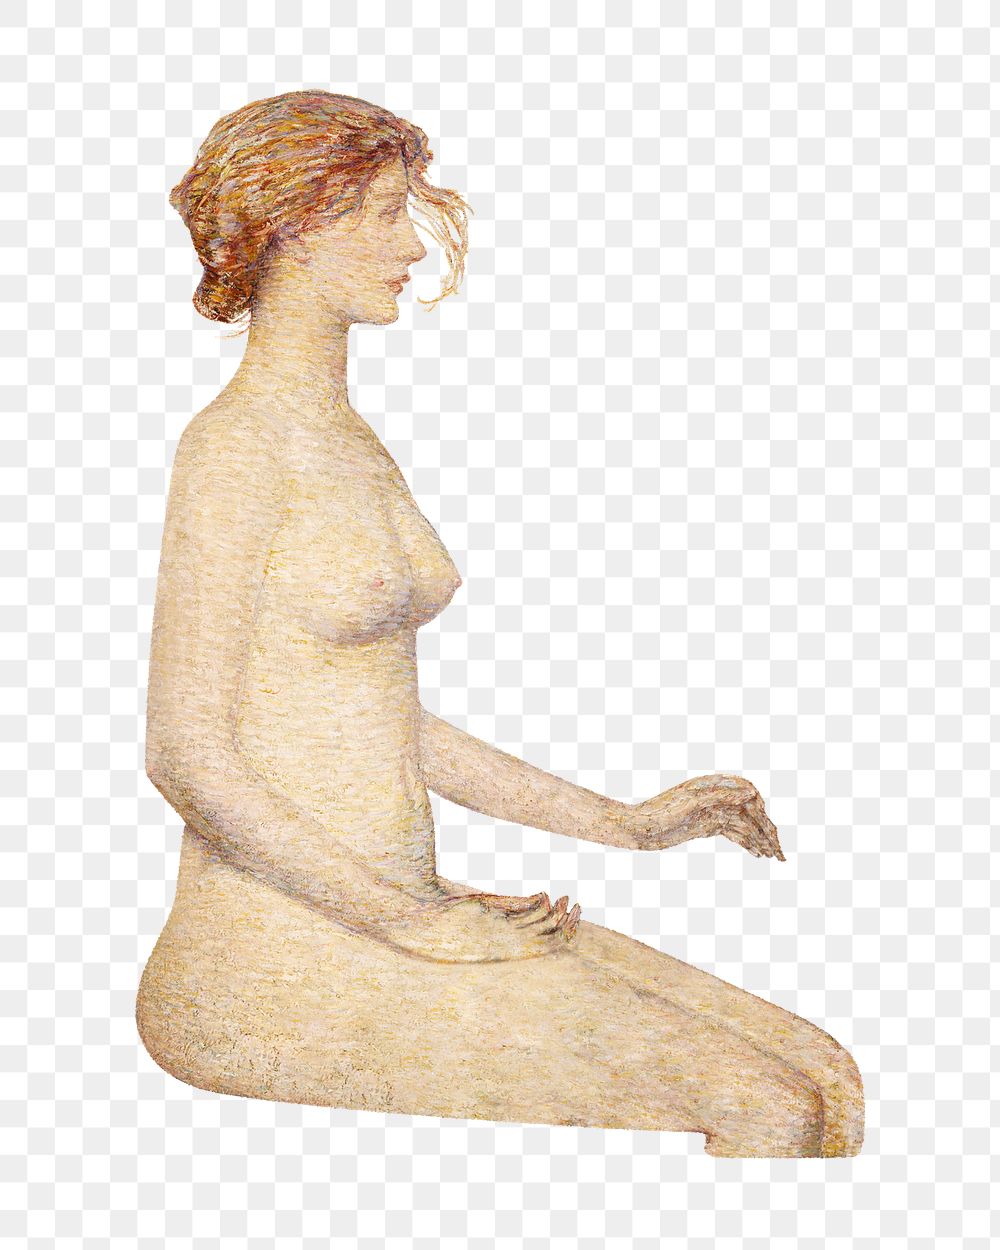 Nude woman sitting png, vintage illustration by Frederick Childe Hassam, transparent background. Remixed by rawpixel.